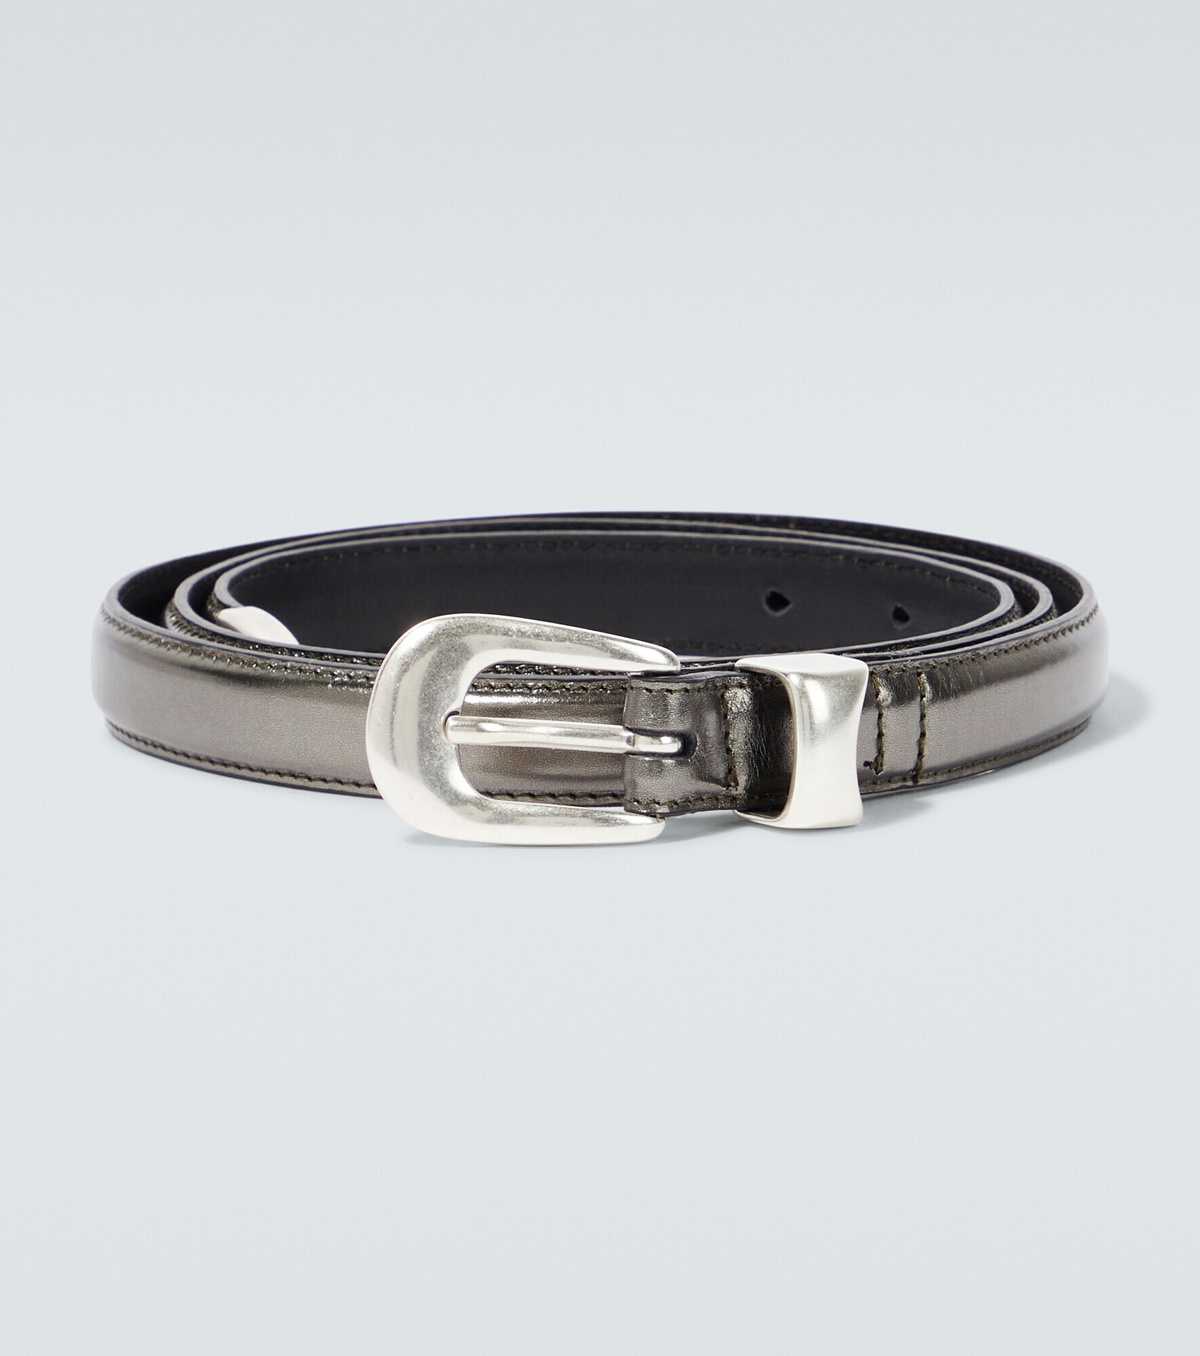 Our Legacy - Metallic leather belt